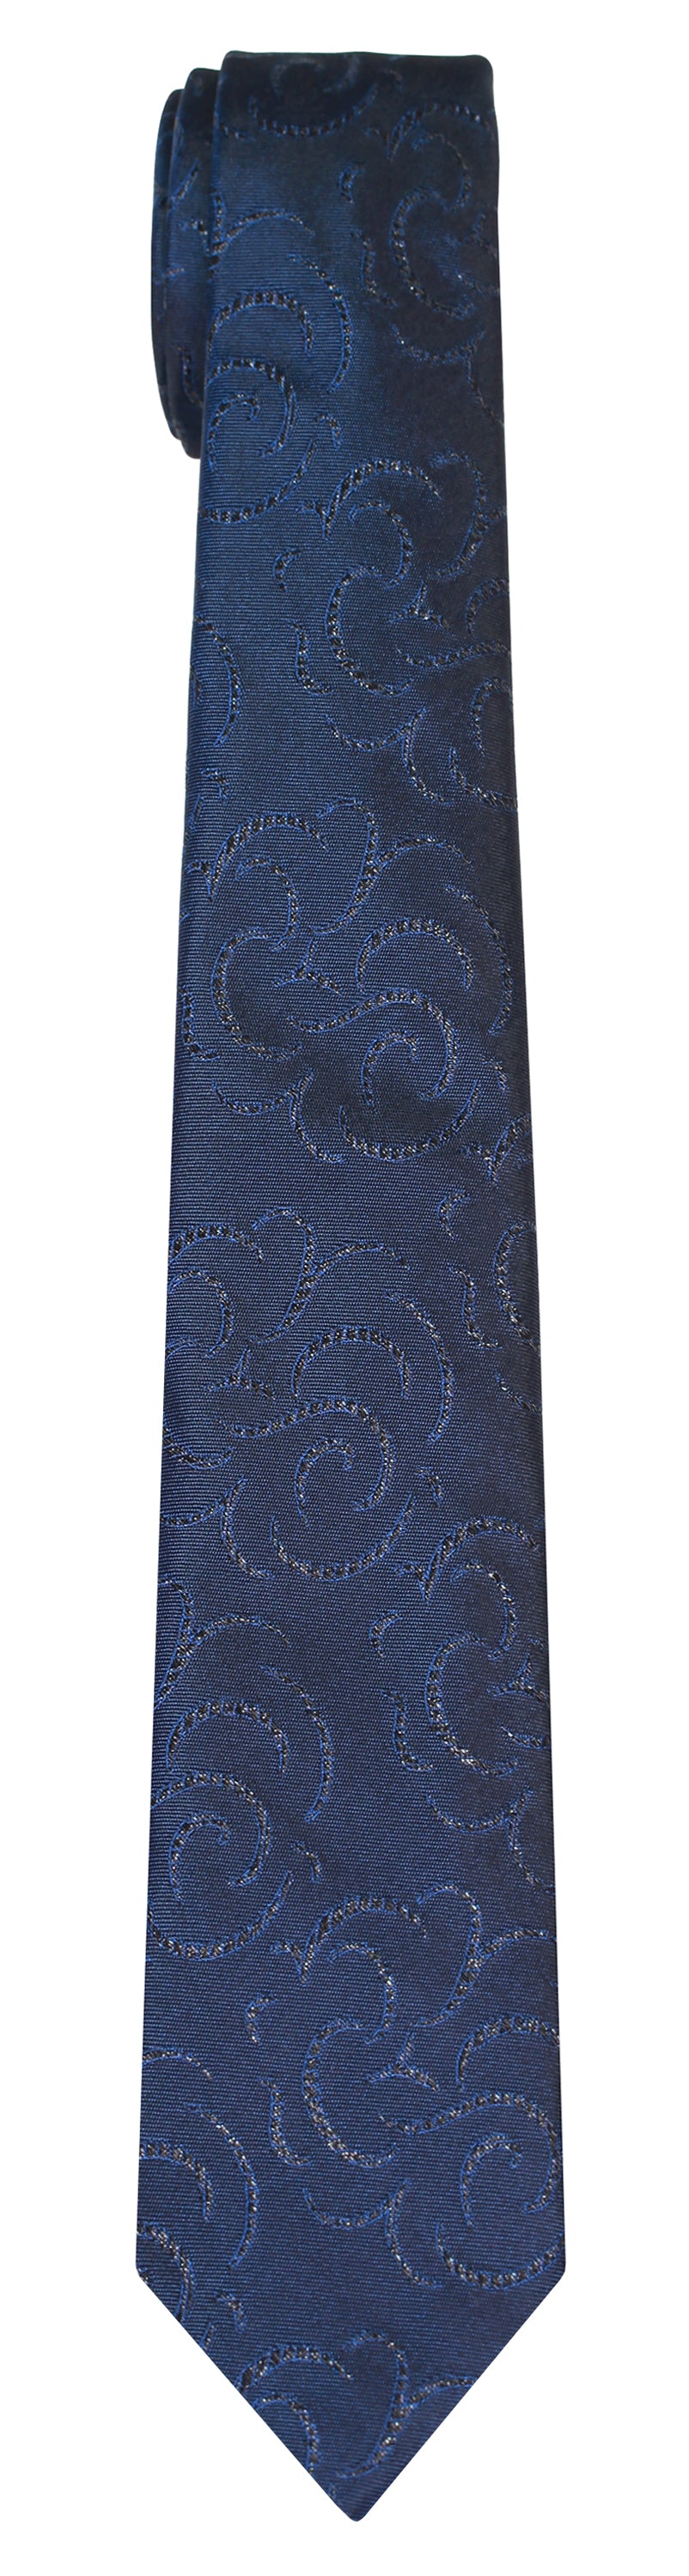 Mimi Fong Silhouette Tie in Midnight